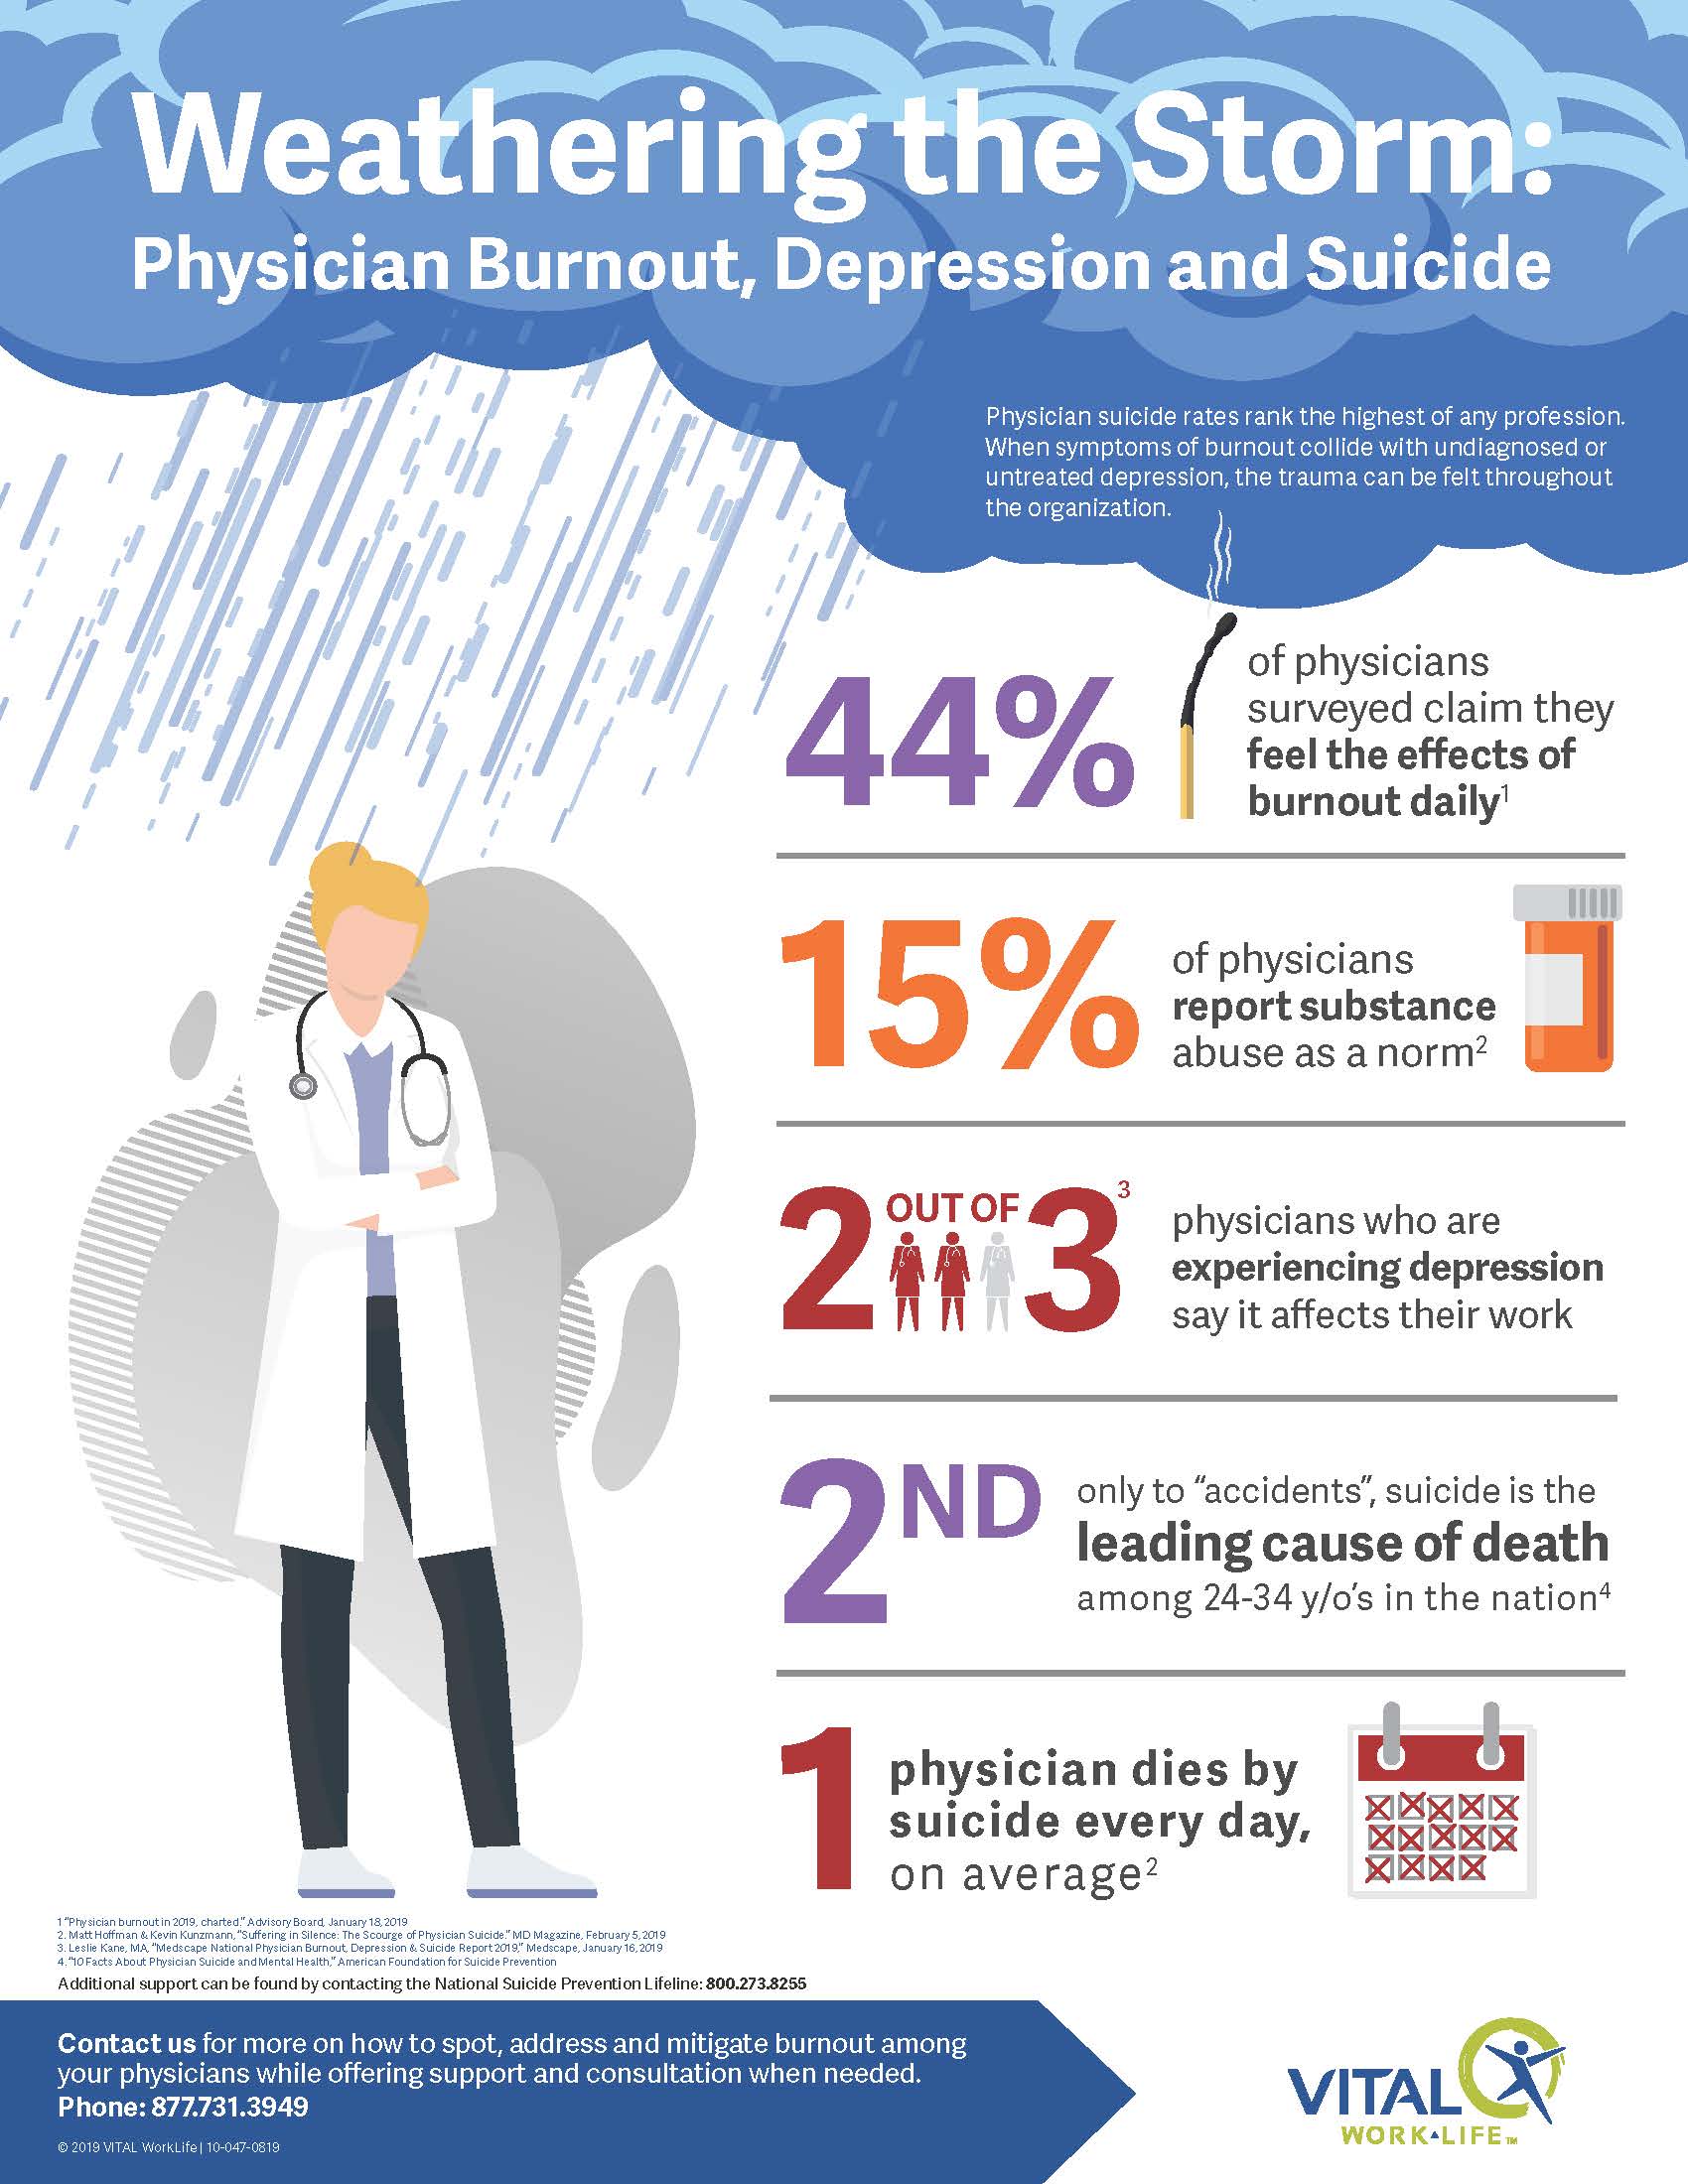 Infographic-Weathering the Storm-Physician Burnout, Depression and Suicide 10-047-0819